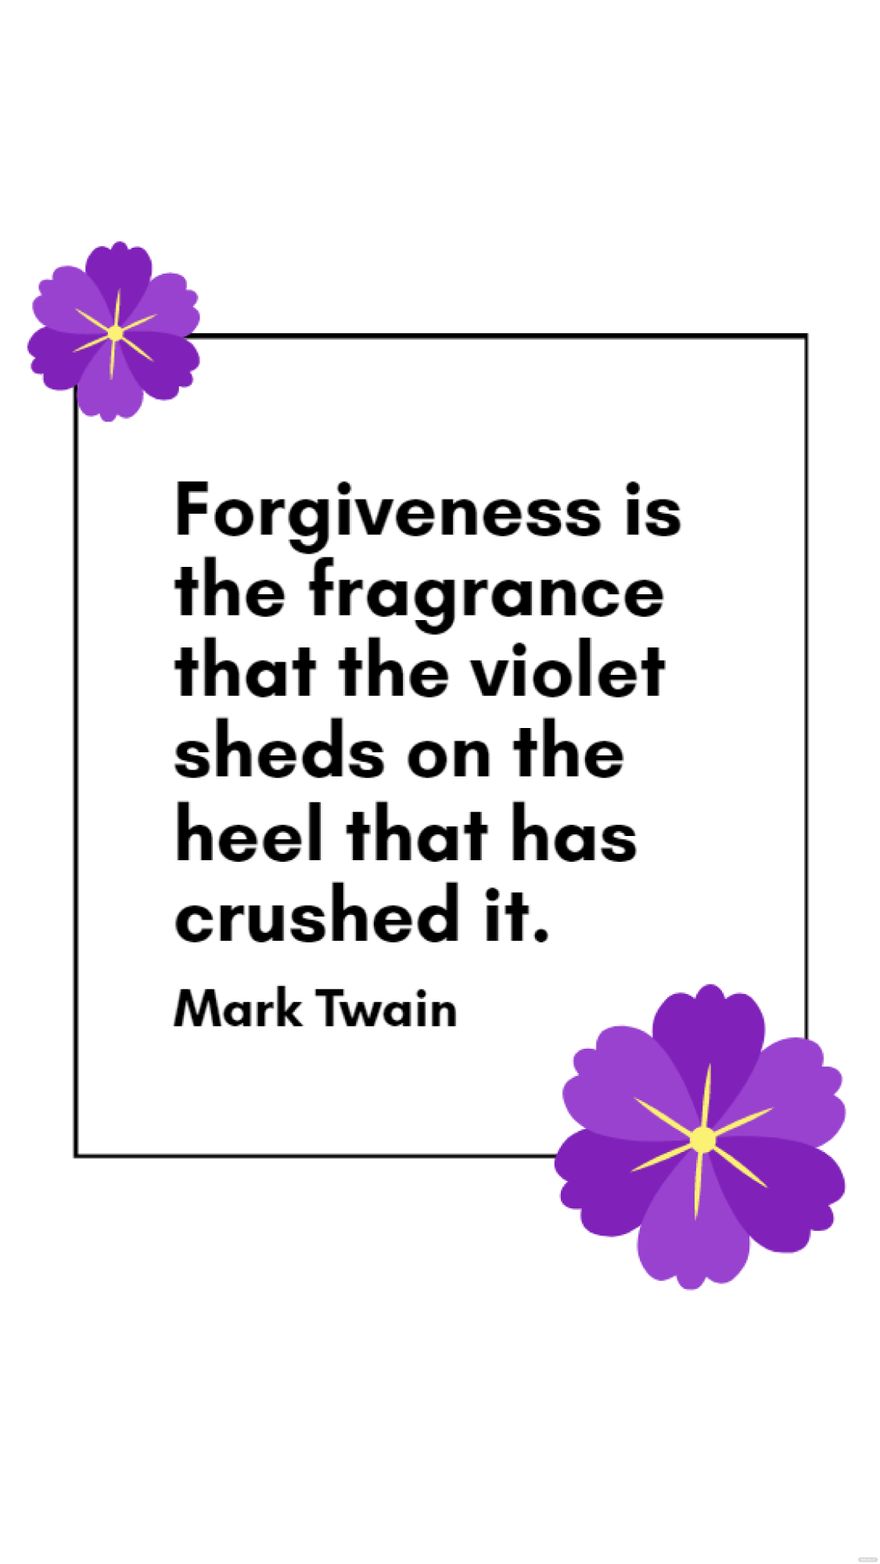 Mark Twain - Forgiveness is the fragrance that the violet sheds on the heel that has crushed it. in JPG